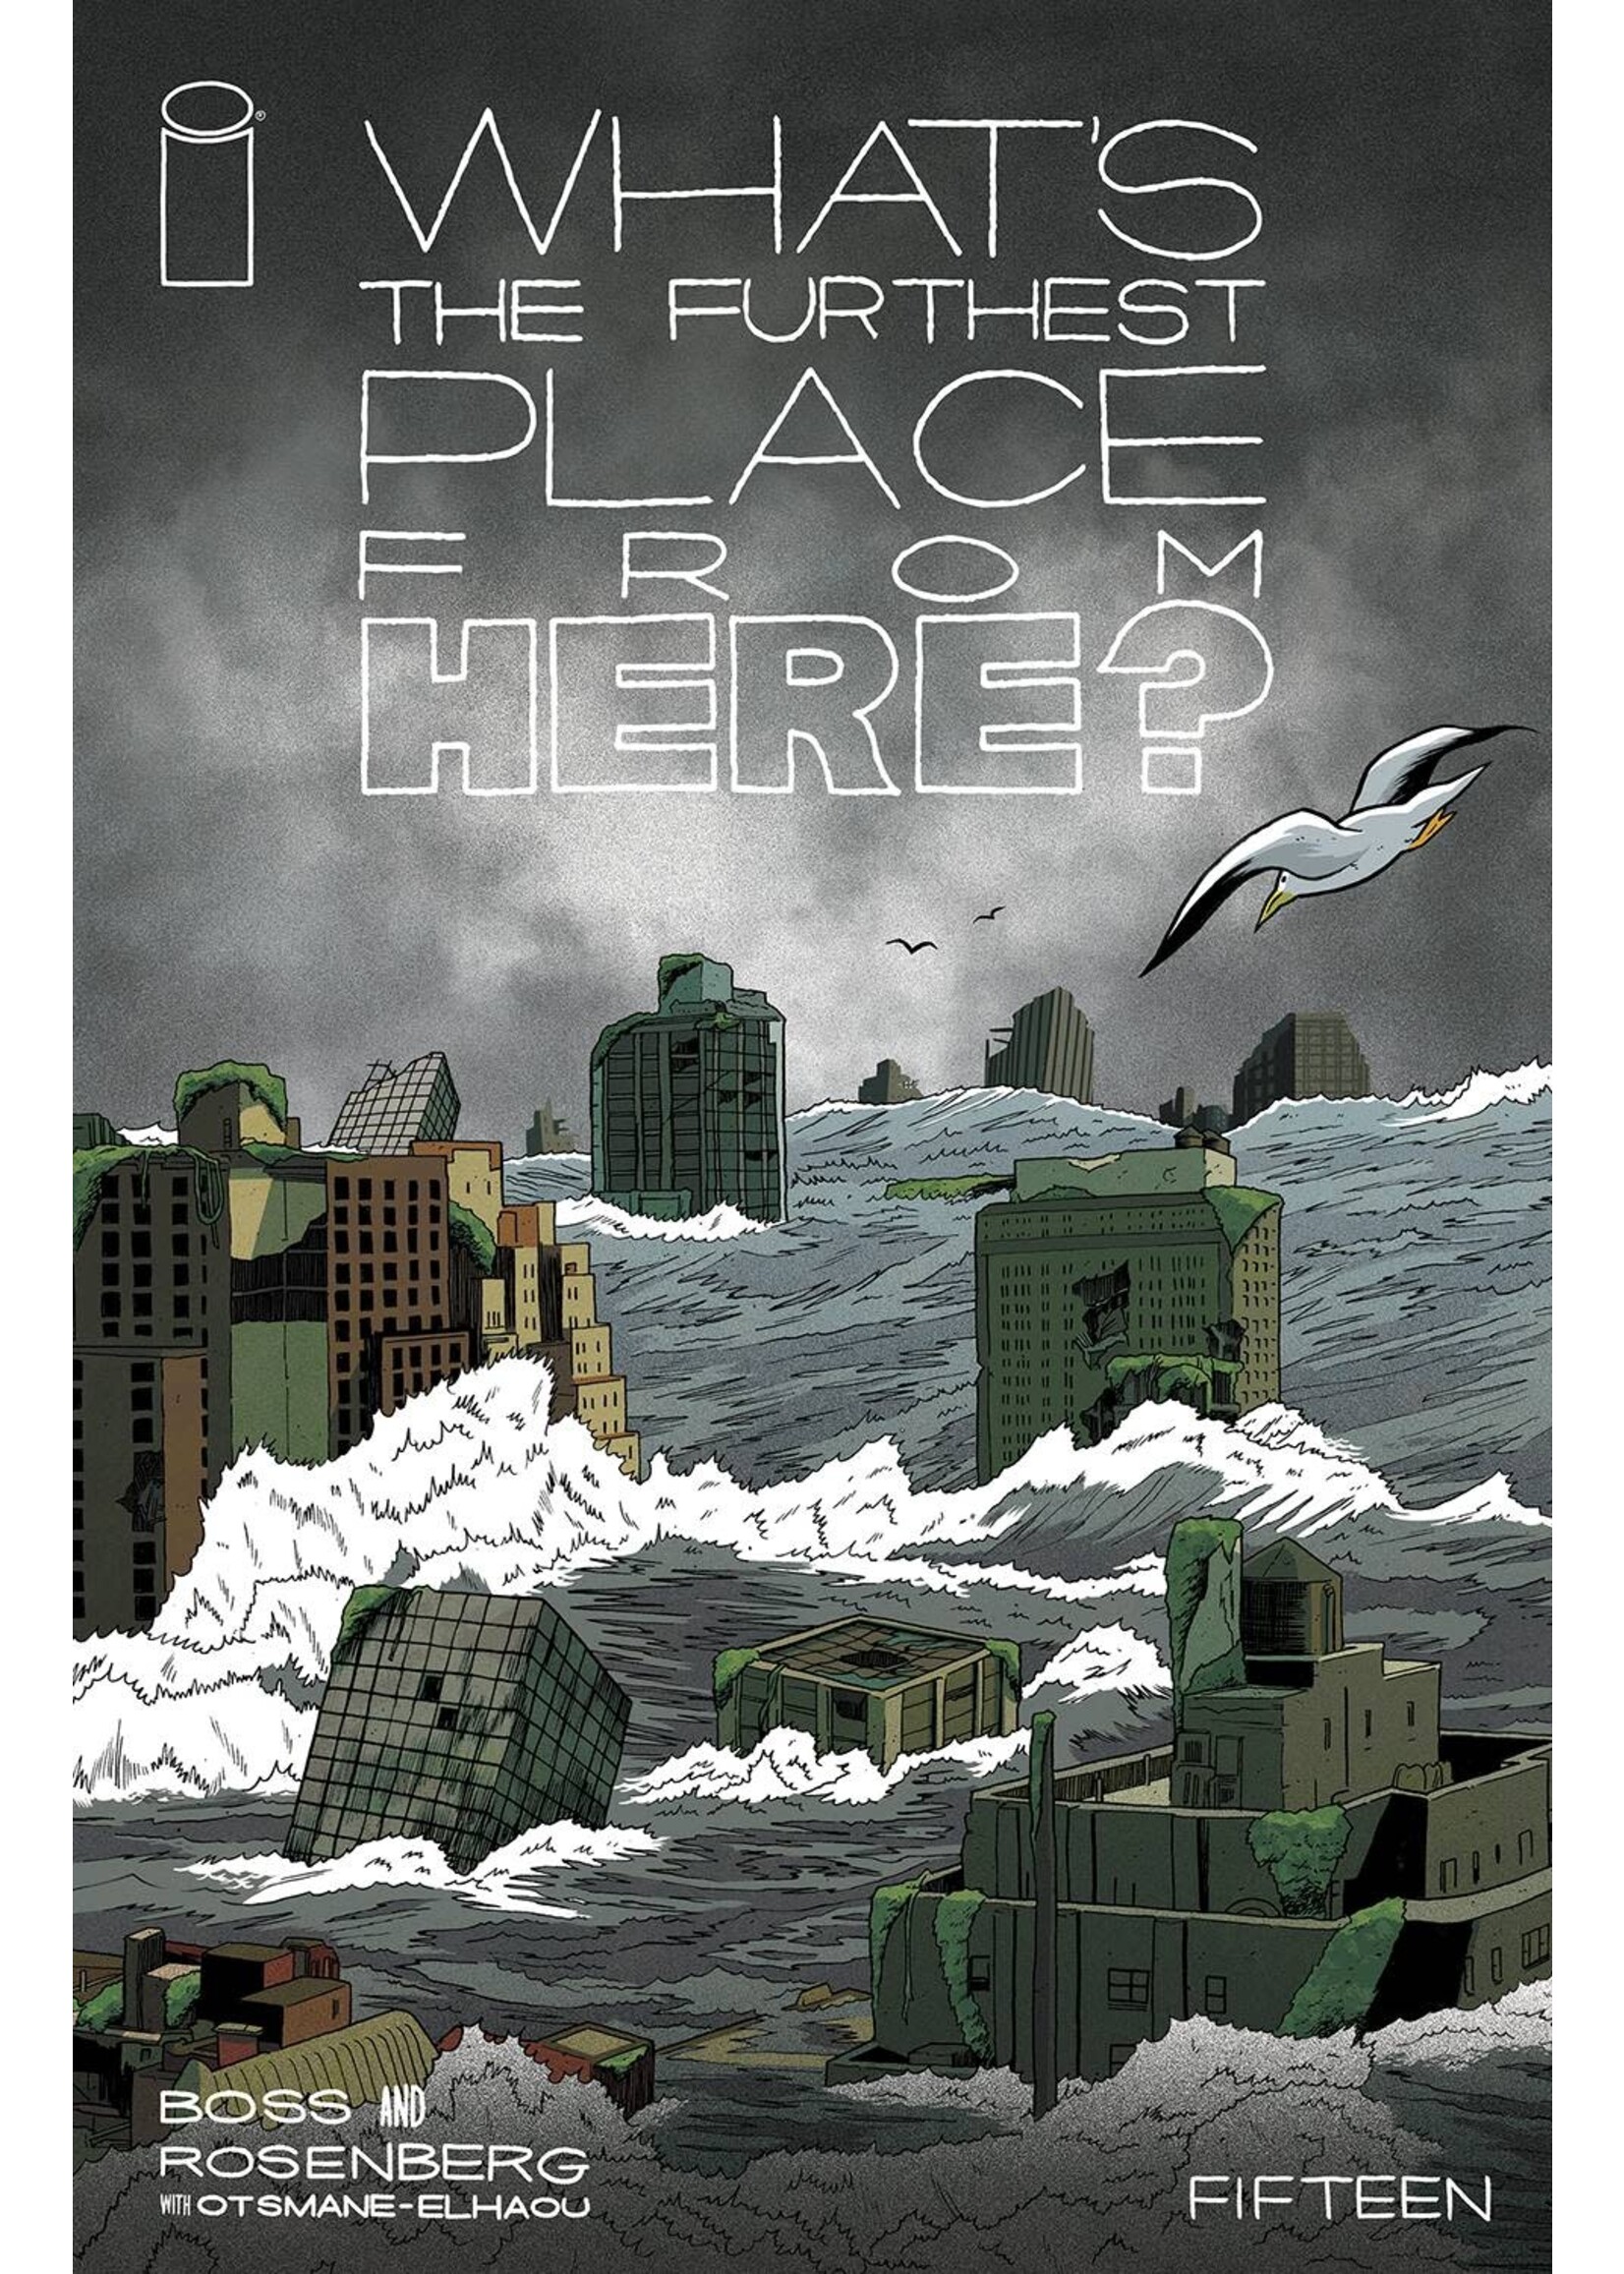 IMAGE COMICS WHATS THE FURTHEST PLACE FROM HERE #15 CVR A BOSS (MR)